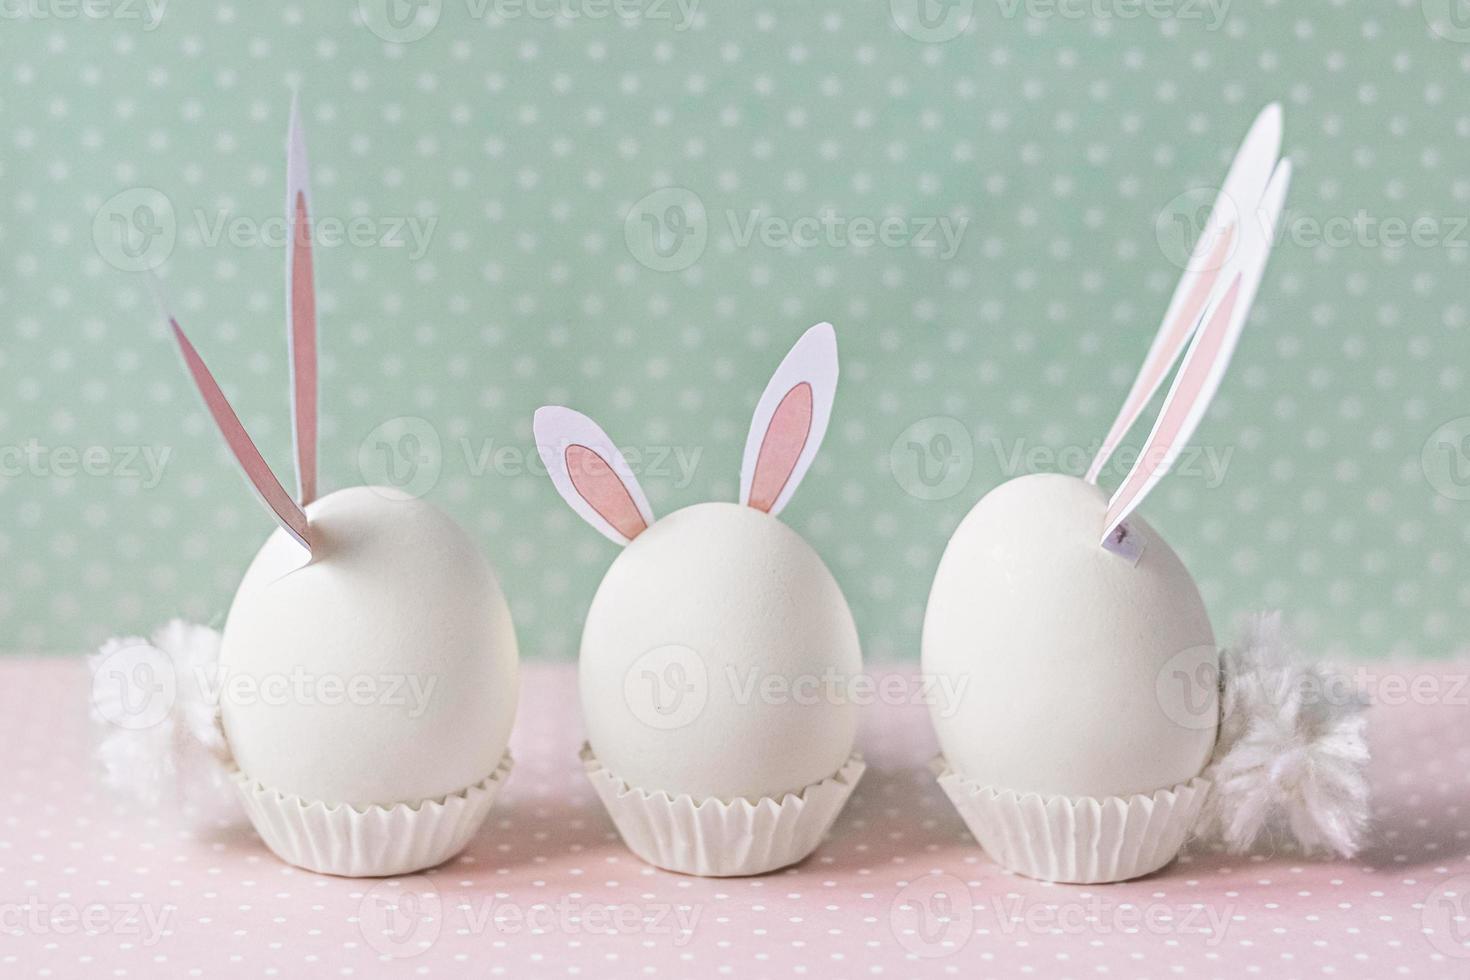 White chicken eggs with bunny ears and tails on bed flowers background. A family. Happy Easter holiday concept photo